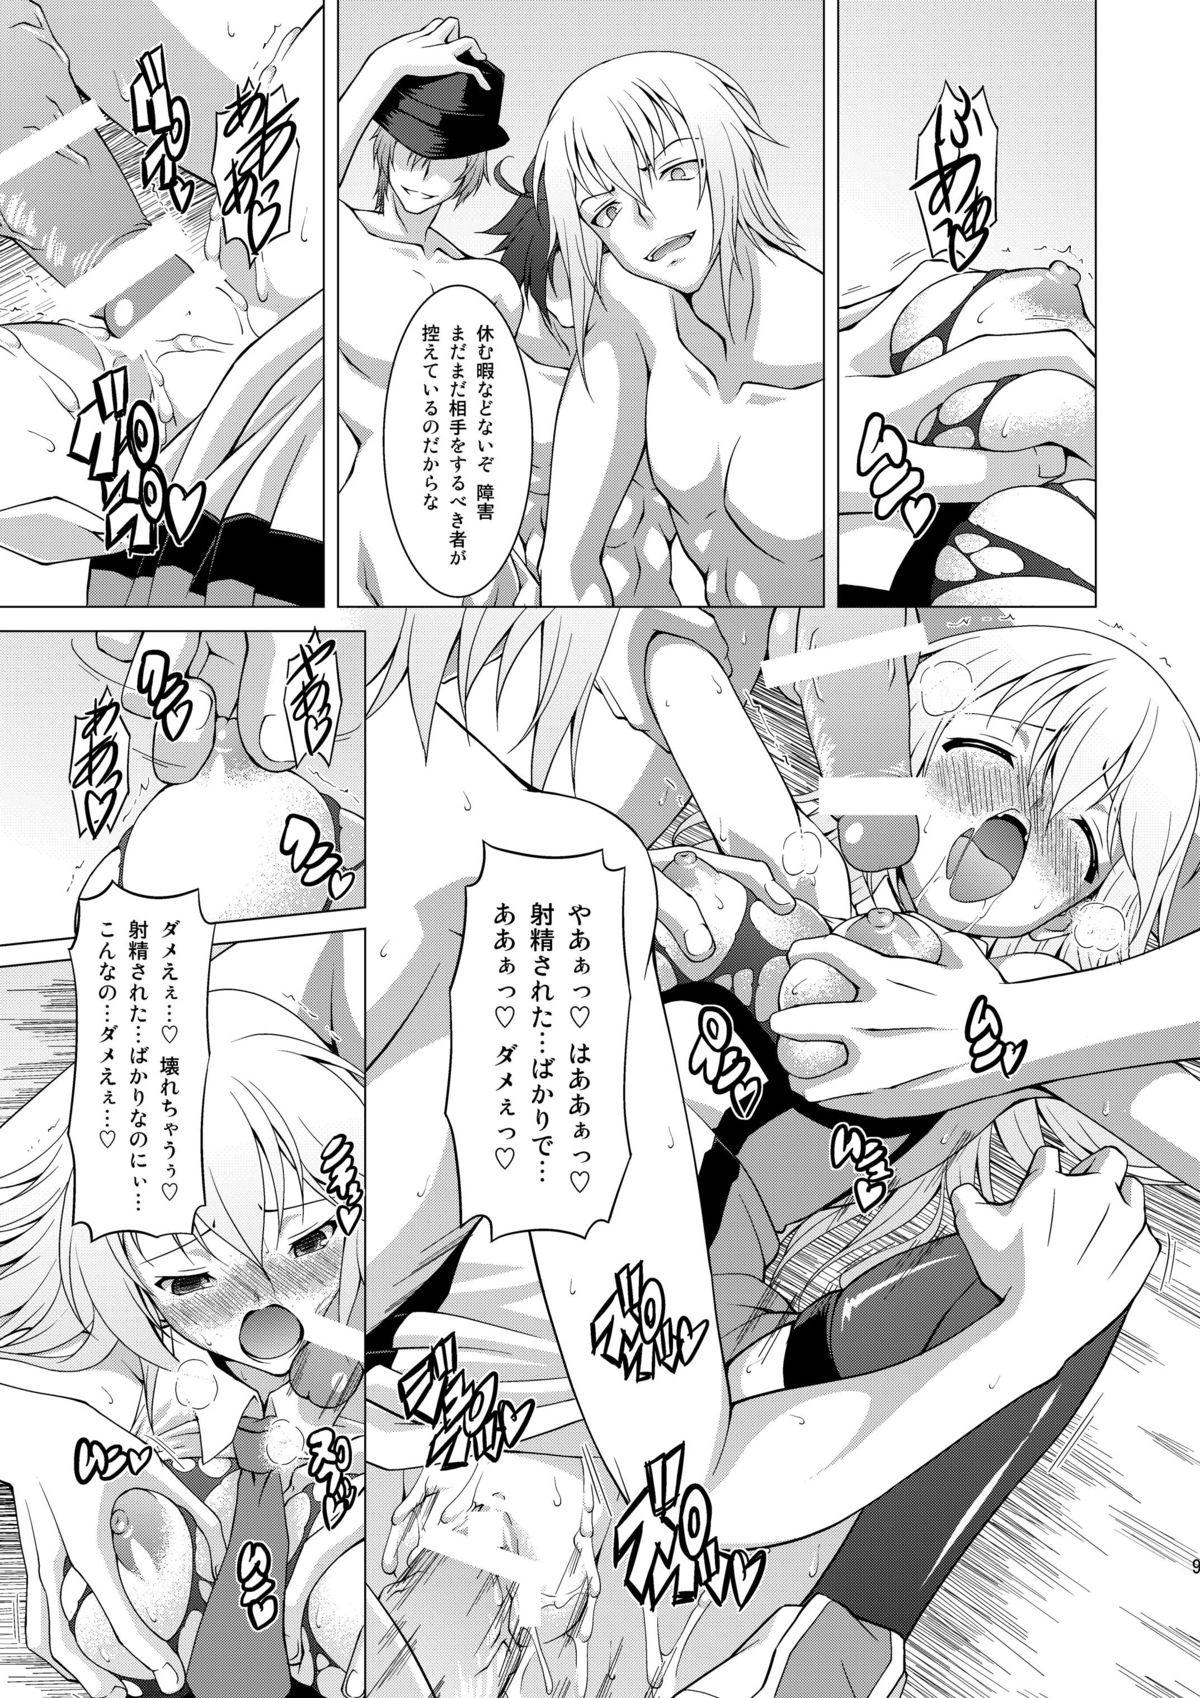 Free Blowjob Ran ☆ Bato - Round 2 - King of fighters Samurai spirits Queens blade Guilty gear Blazblue Hot Girls Getting Fucked - Page 9